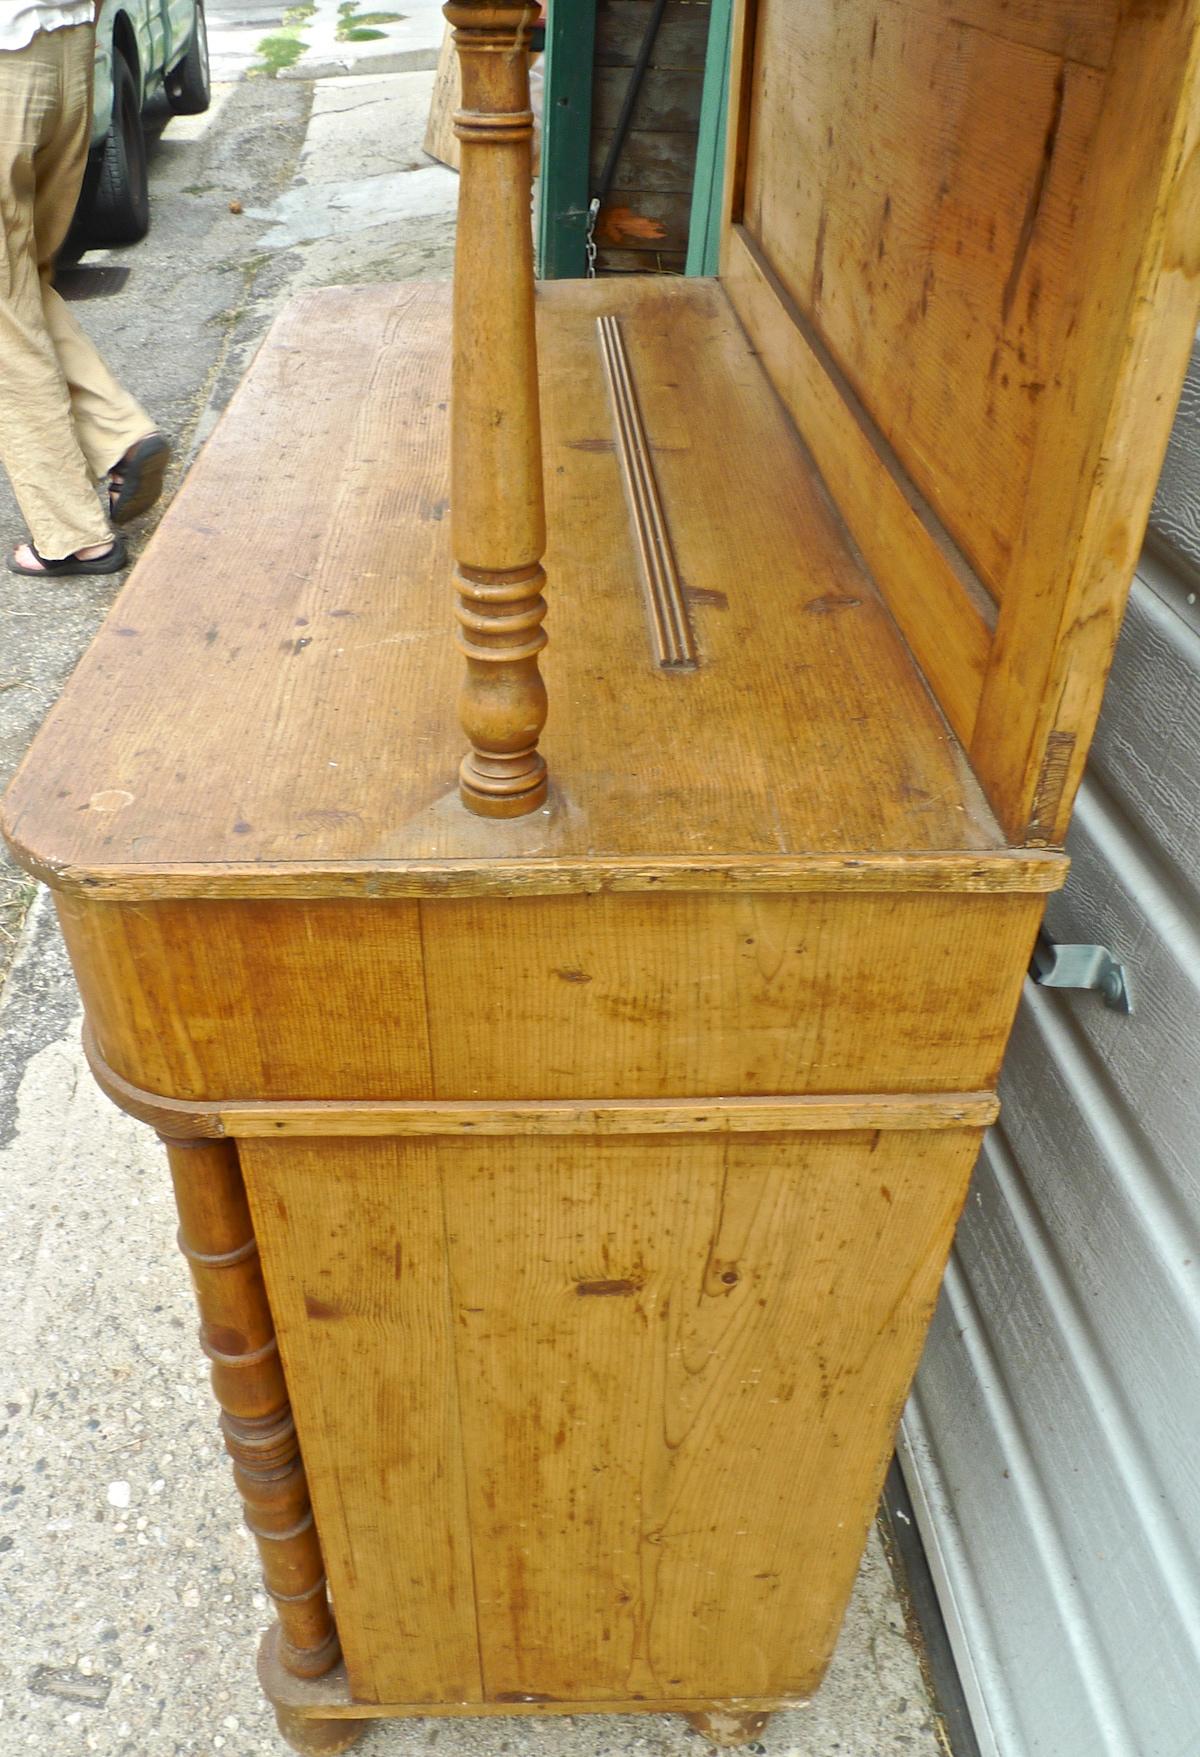 19th Century French Open Faced Country Dresser with 3 Shelves, 2 Doors and One-Drawer